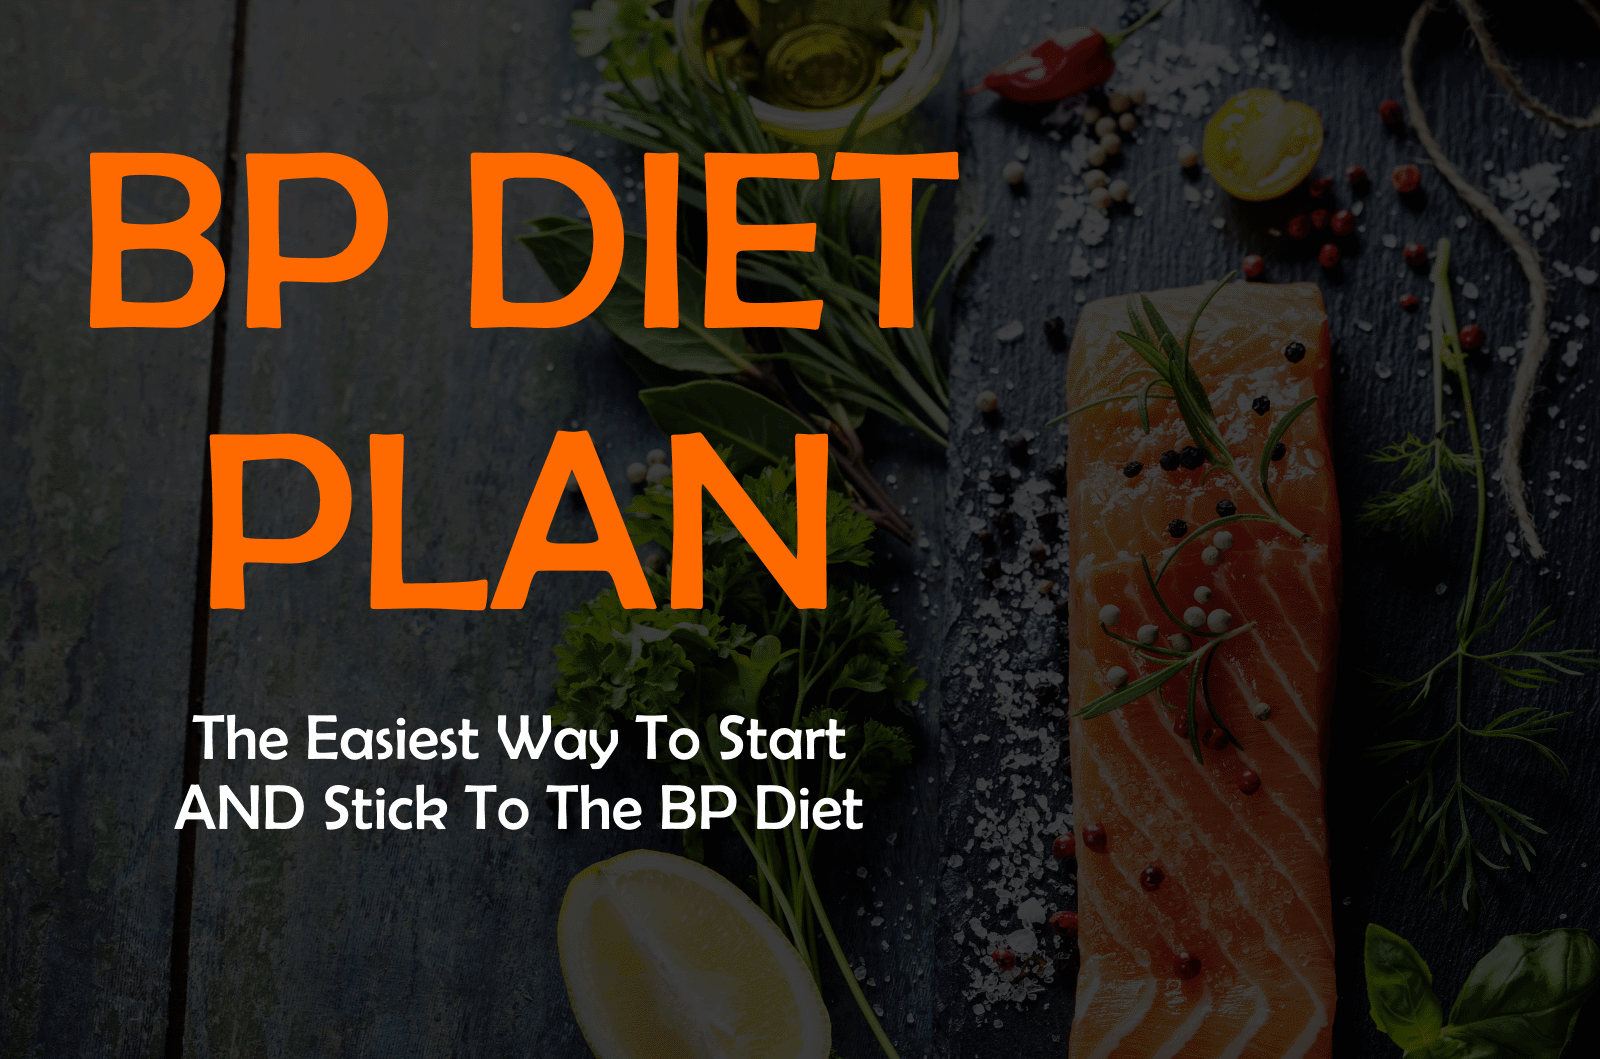 BP Diet Plan - the easiest way to start and stick to the Bulletproof Diet